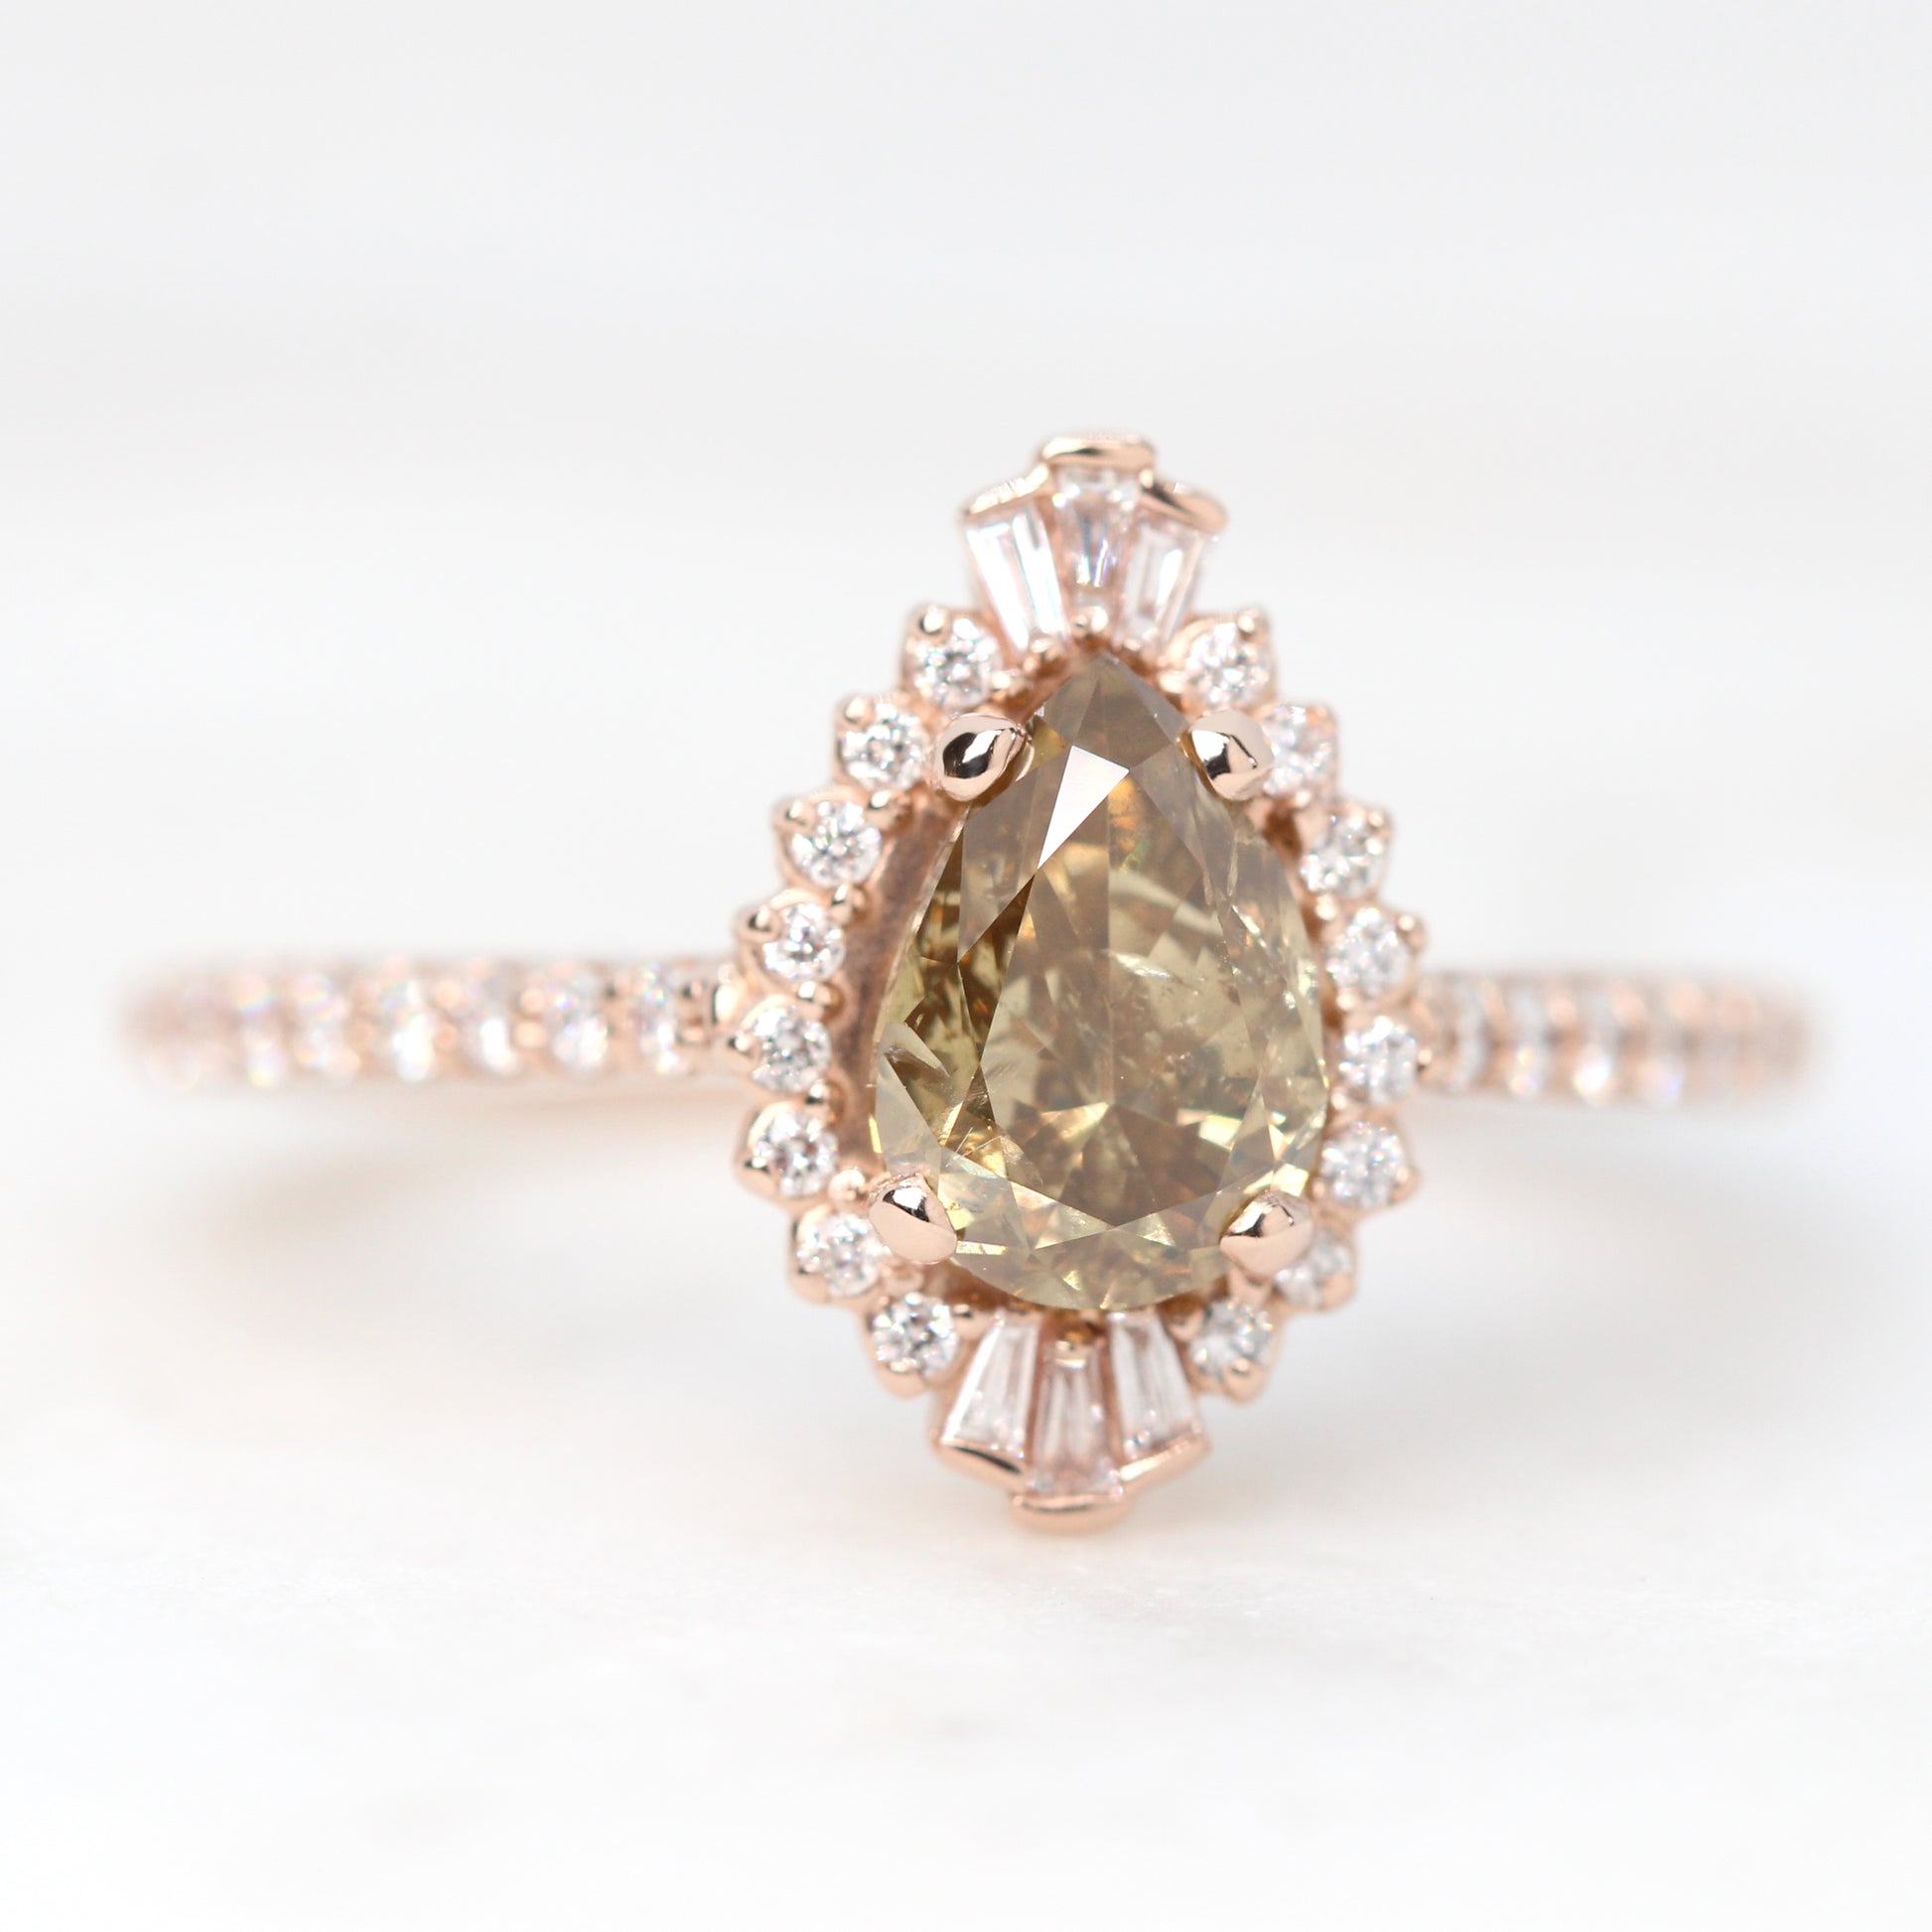 Tinsley Ring with a 1.01 Carat Pear Champagne Salt and Pepper Diamond and White Accent Diamonds in 14k Rose Gold - Ready to Size and Ship - Midwinter Co. Alternative Bridal Rings and Modern Fine Jewelry